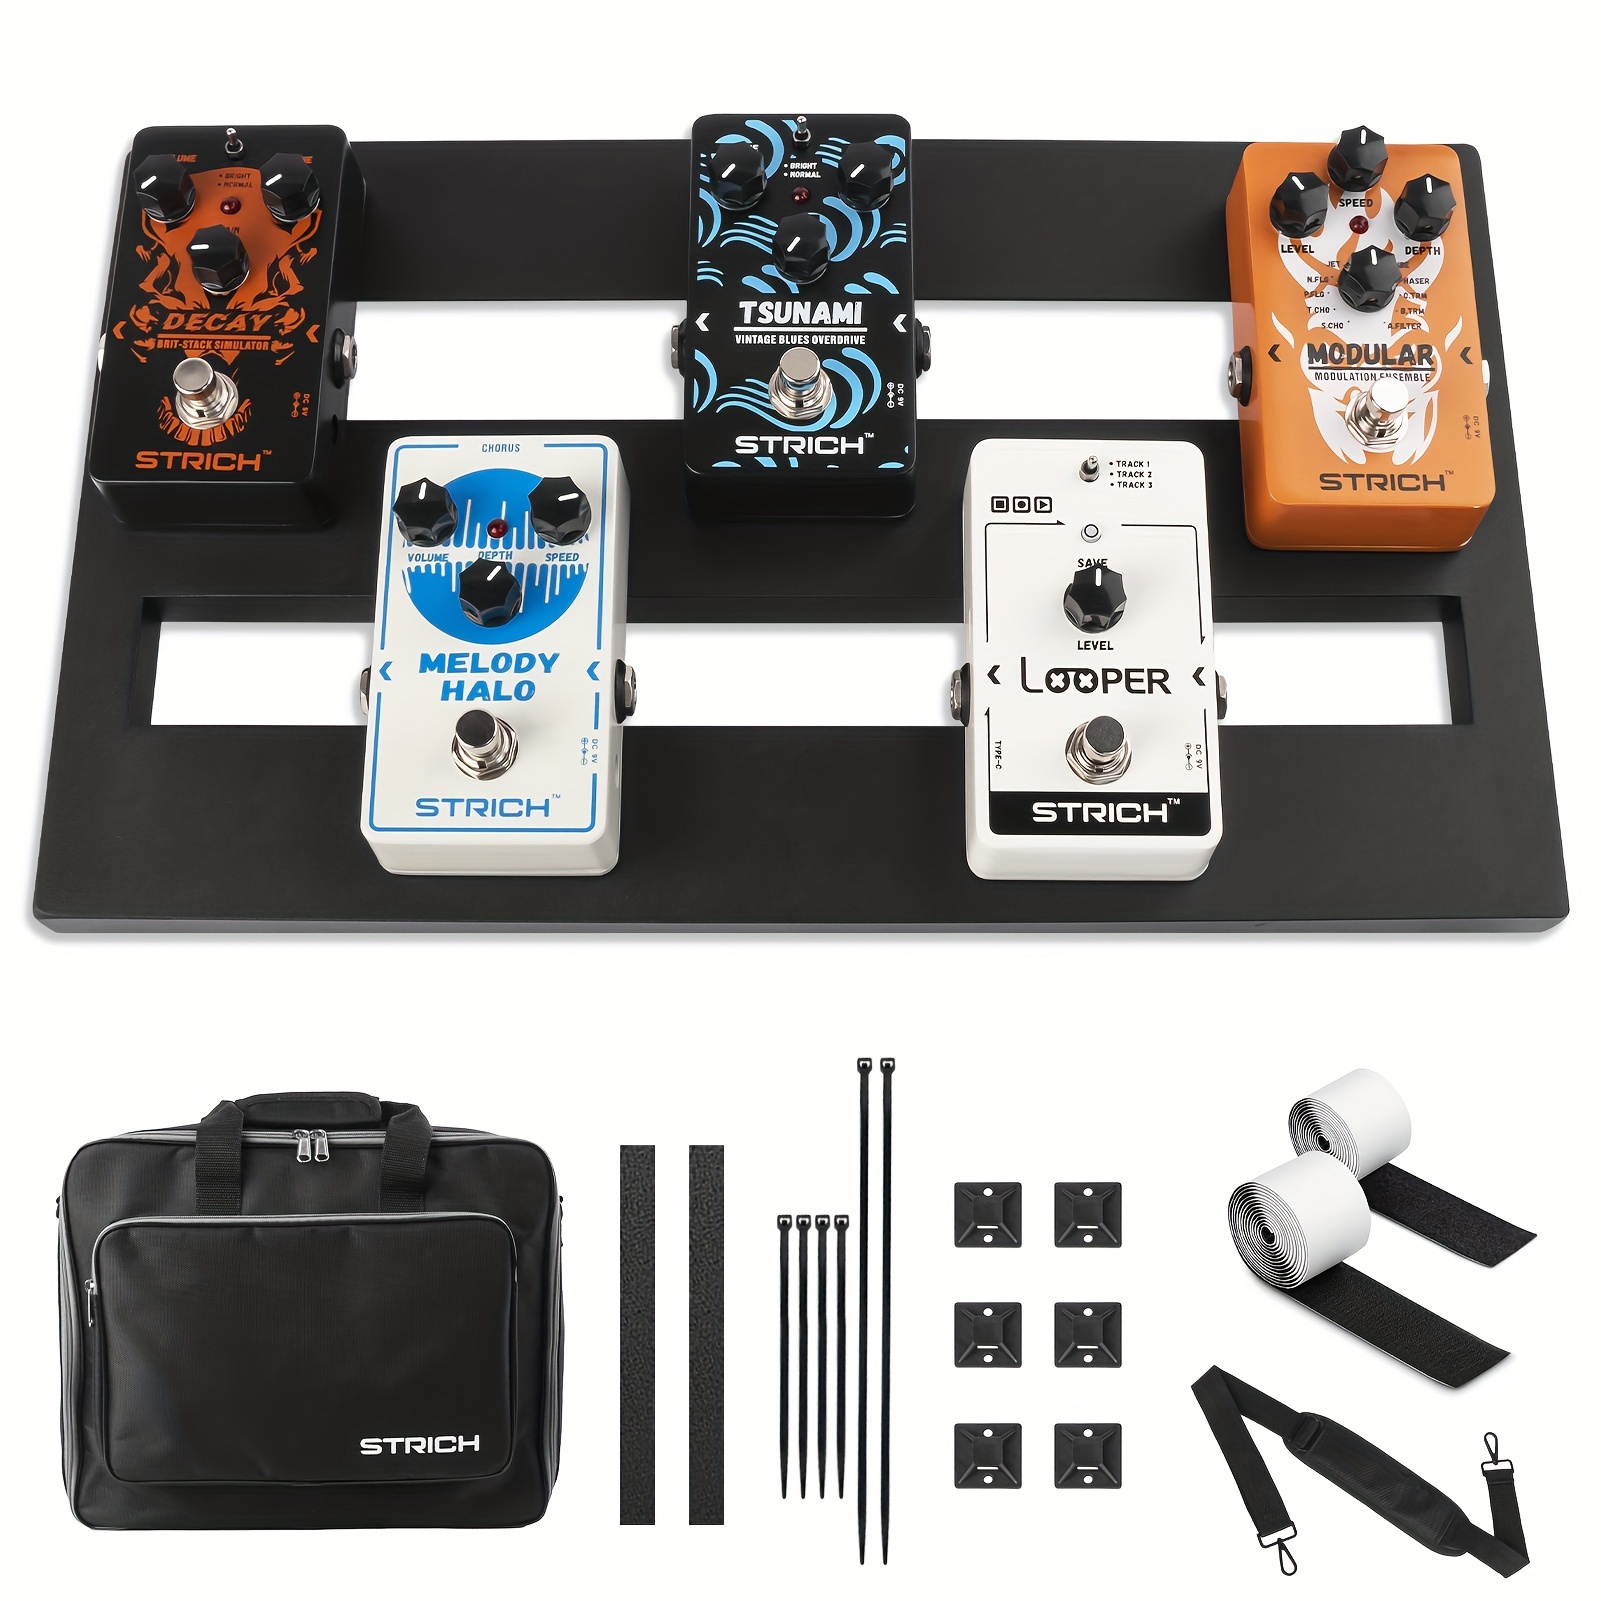 

Strich Super Light Aluminum Pedalboard - 1.2lb Weight, 15" X 8.66" Dimensions, Portable With Carry Bag, Mini+ 15 3-row